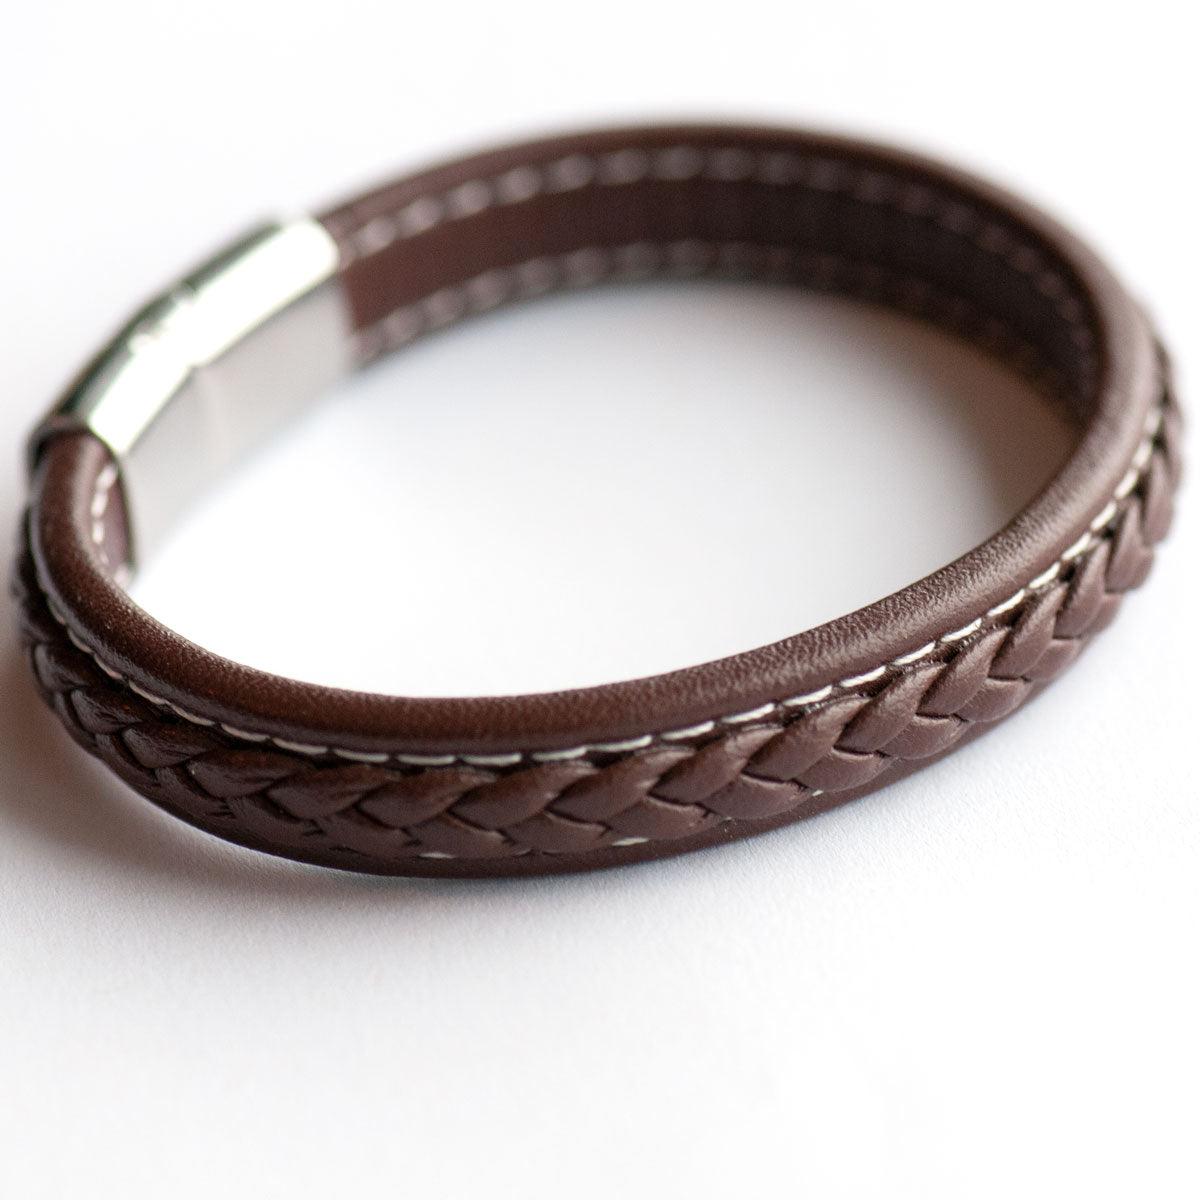 Stainless Steel Cuba The Bangles 2021 For Unisex Bracelets Designer Punk  Chain Link Charm In Gold And Silver Perfect For Weddings And Special  Occasions From Ibezo, $27.63 | DHgate.Com